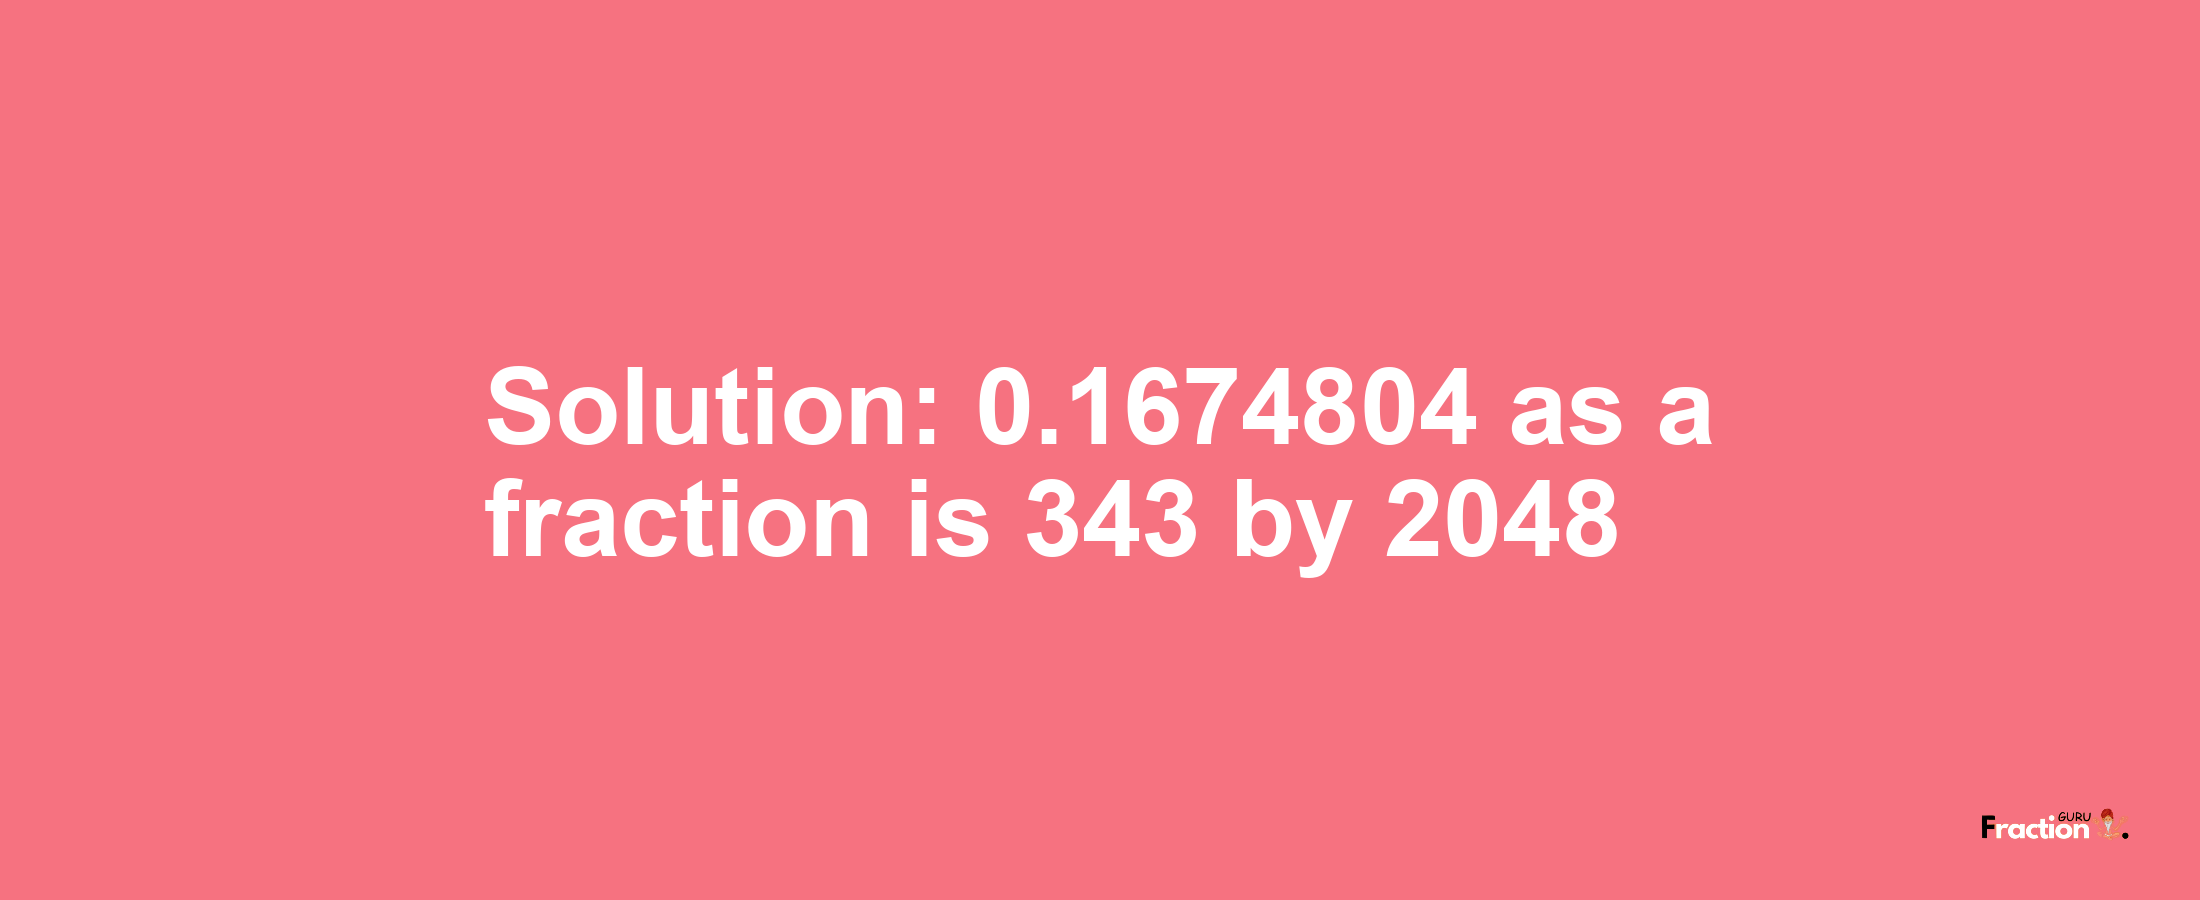 Solution:0.1674804 as a fraction is 343/2048